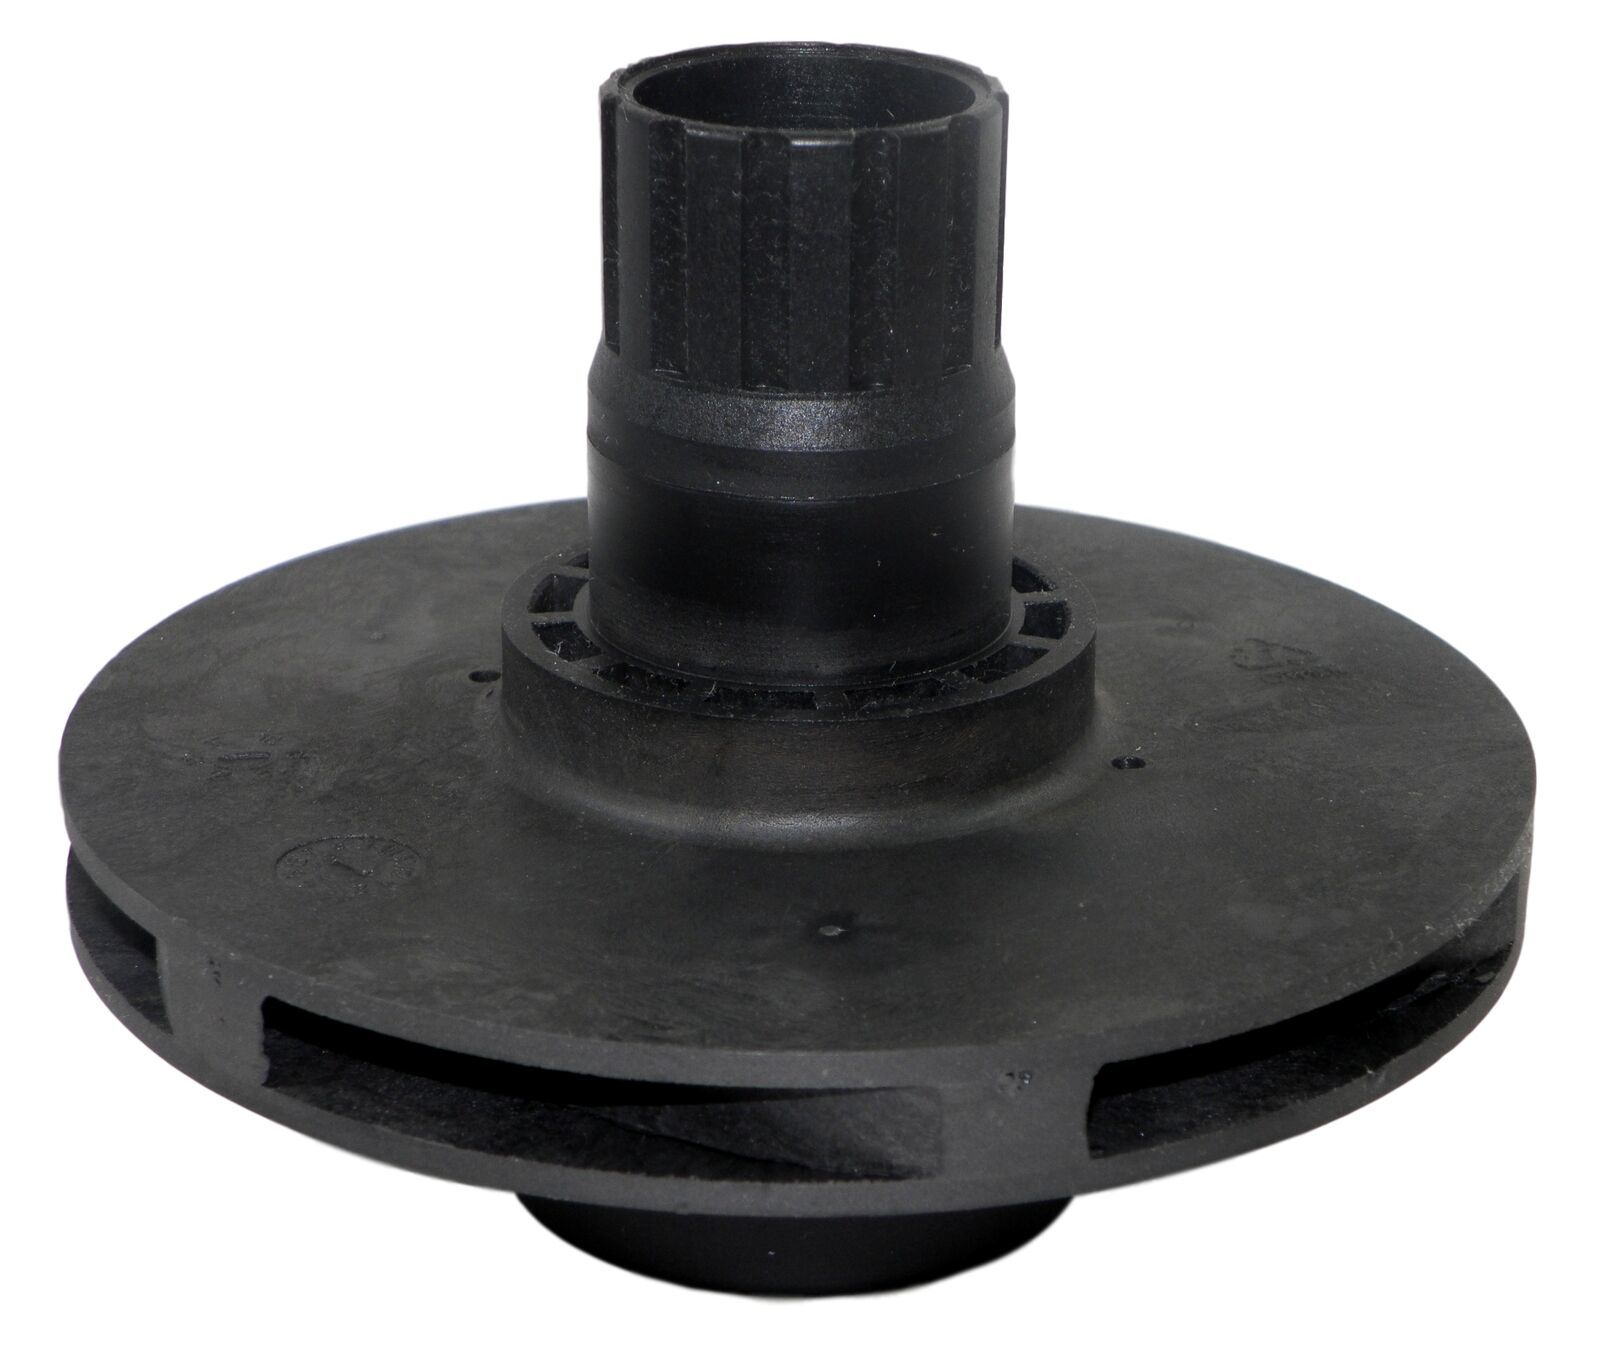 Primary image for Dayton PP5541128G Impeller for Dayton 5PXE8A Pool & Spa Pumps